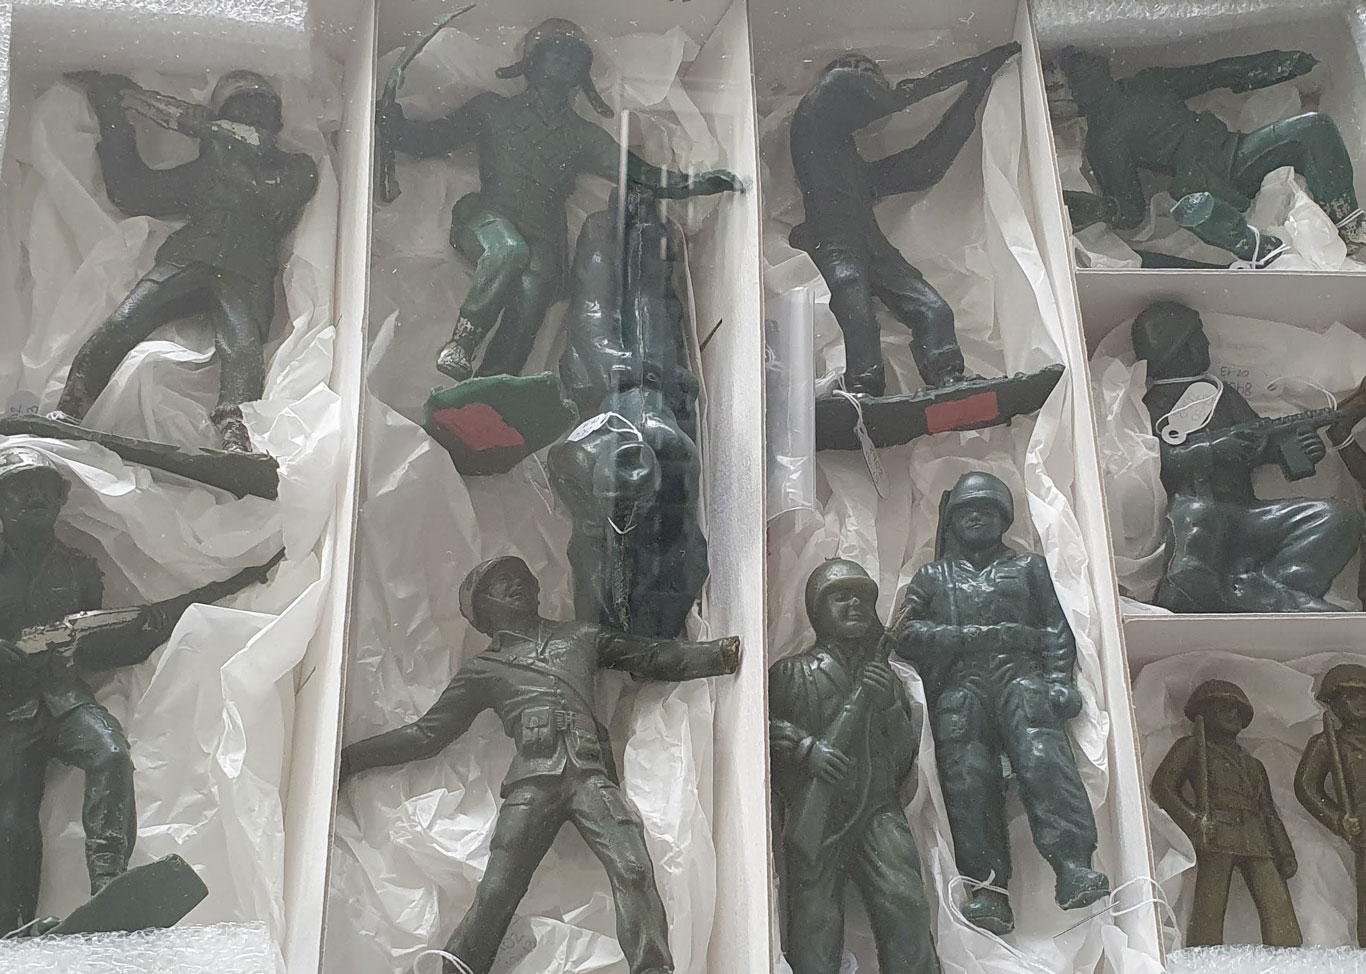 Box containing 12 toy soldiers. There are specimens pointing weapons or in different attack positions.